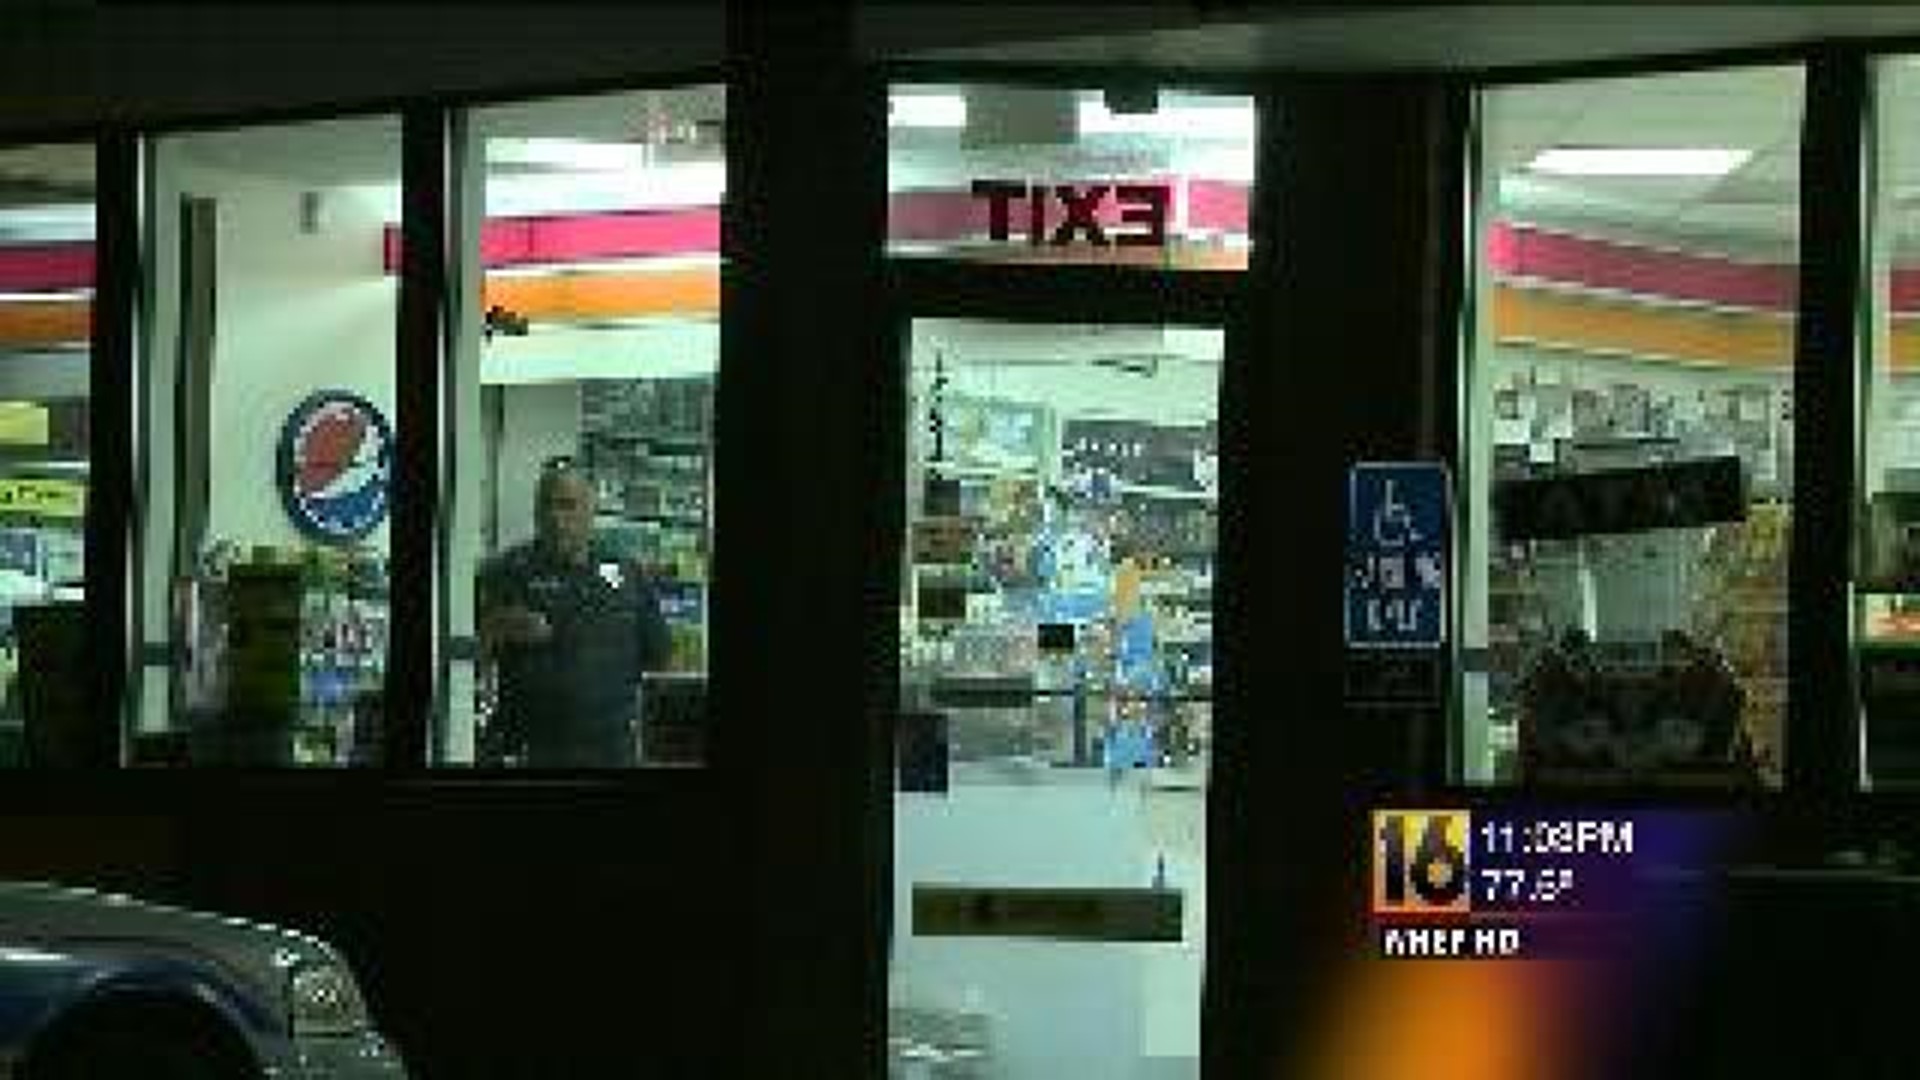 Armed Robbery Under Investigation